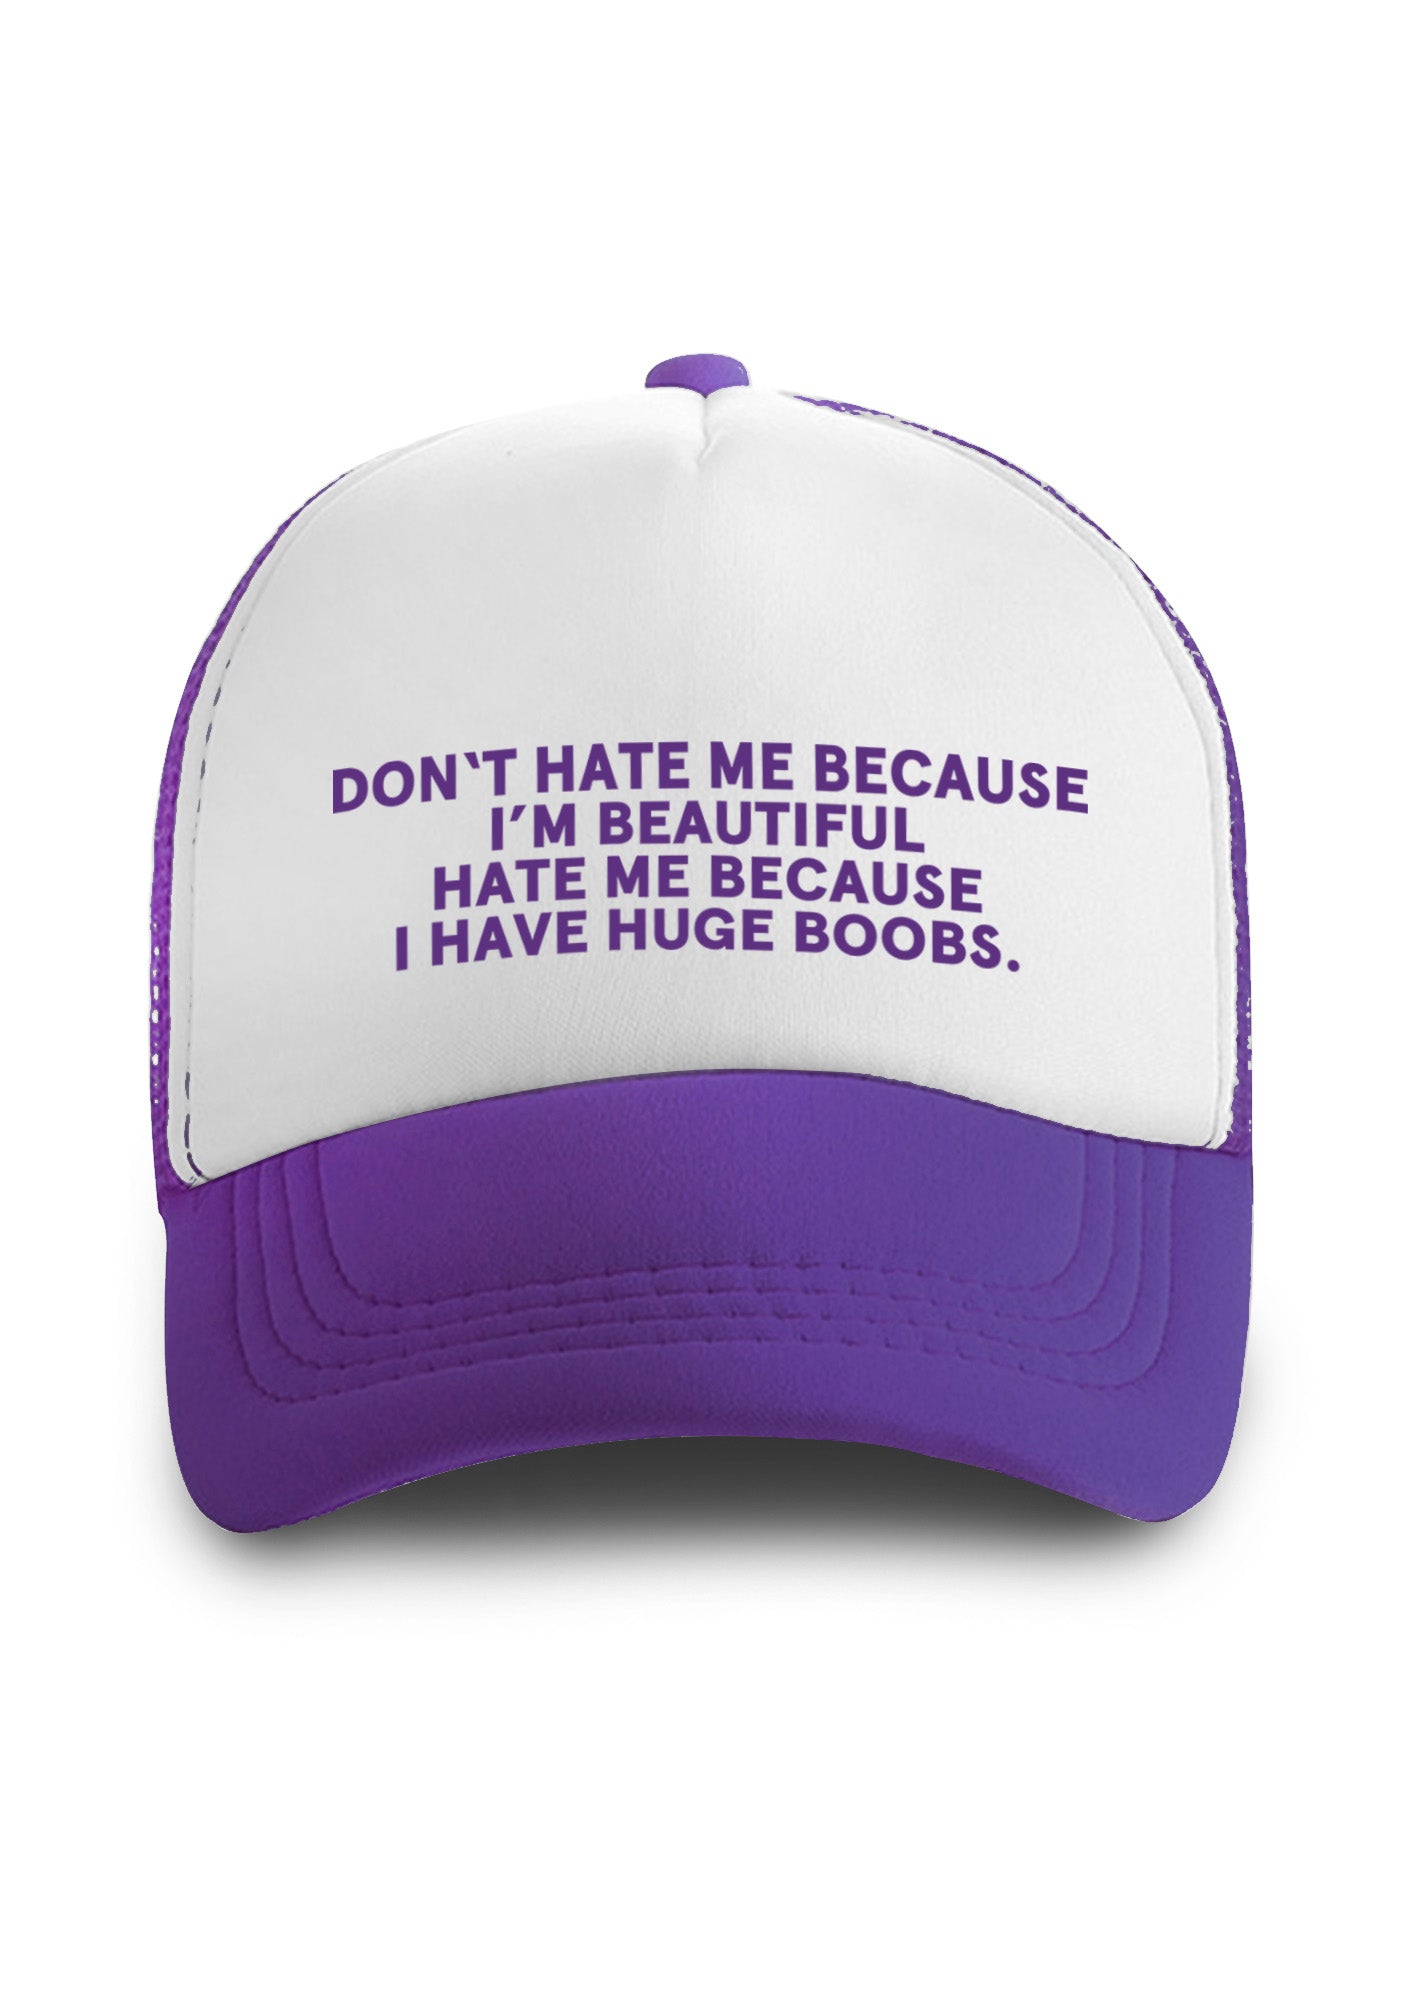 Hate Me Because I Have Huge Bxxbs Trucker Hat